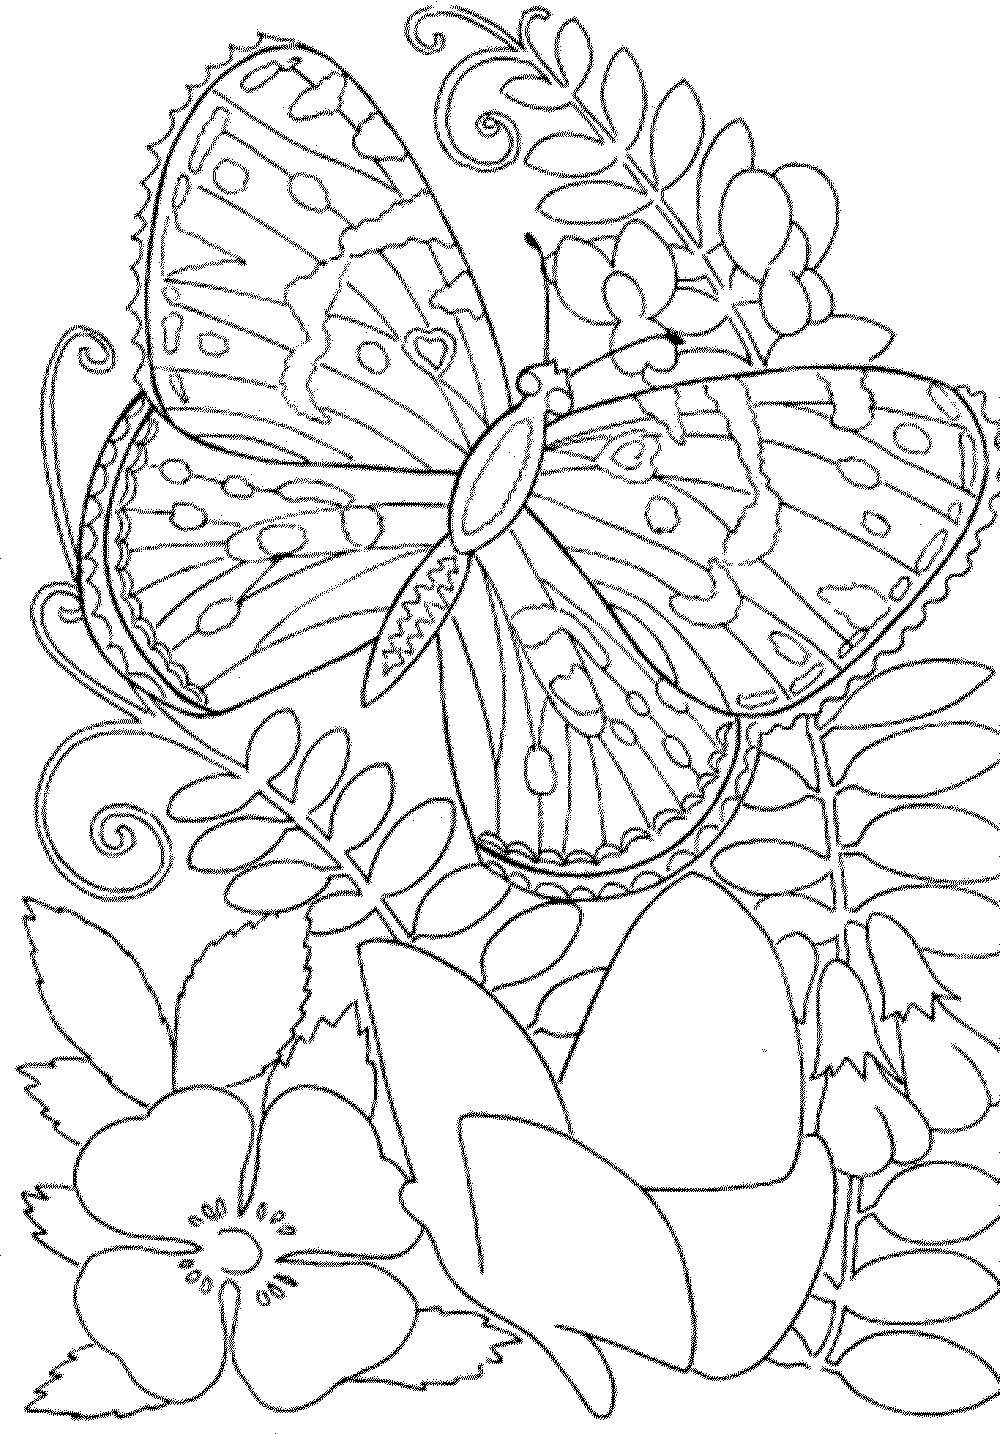 Adult Coloring Pages For Free
 Free Owl Adult Coloring Pages To Print Coloring Home